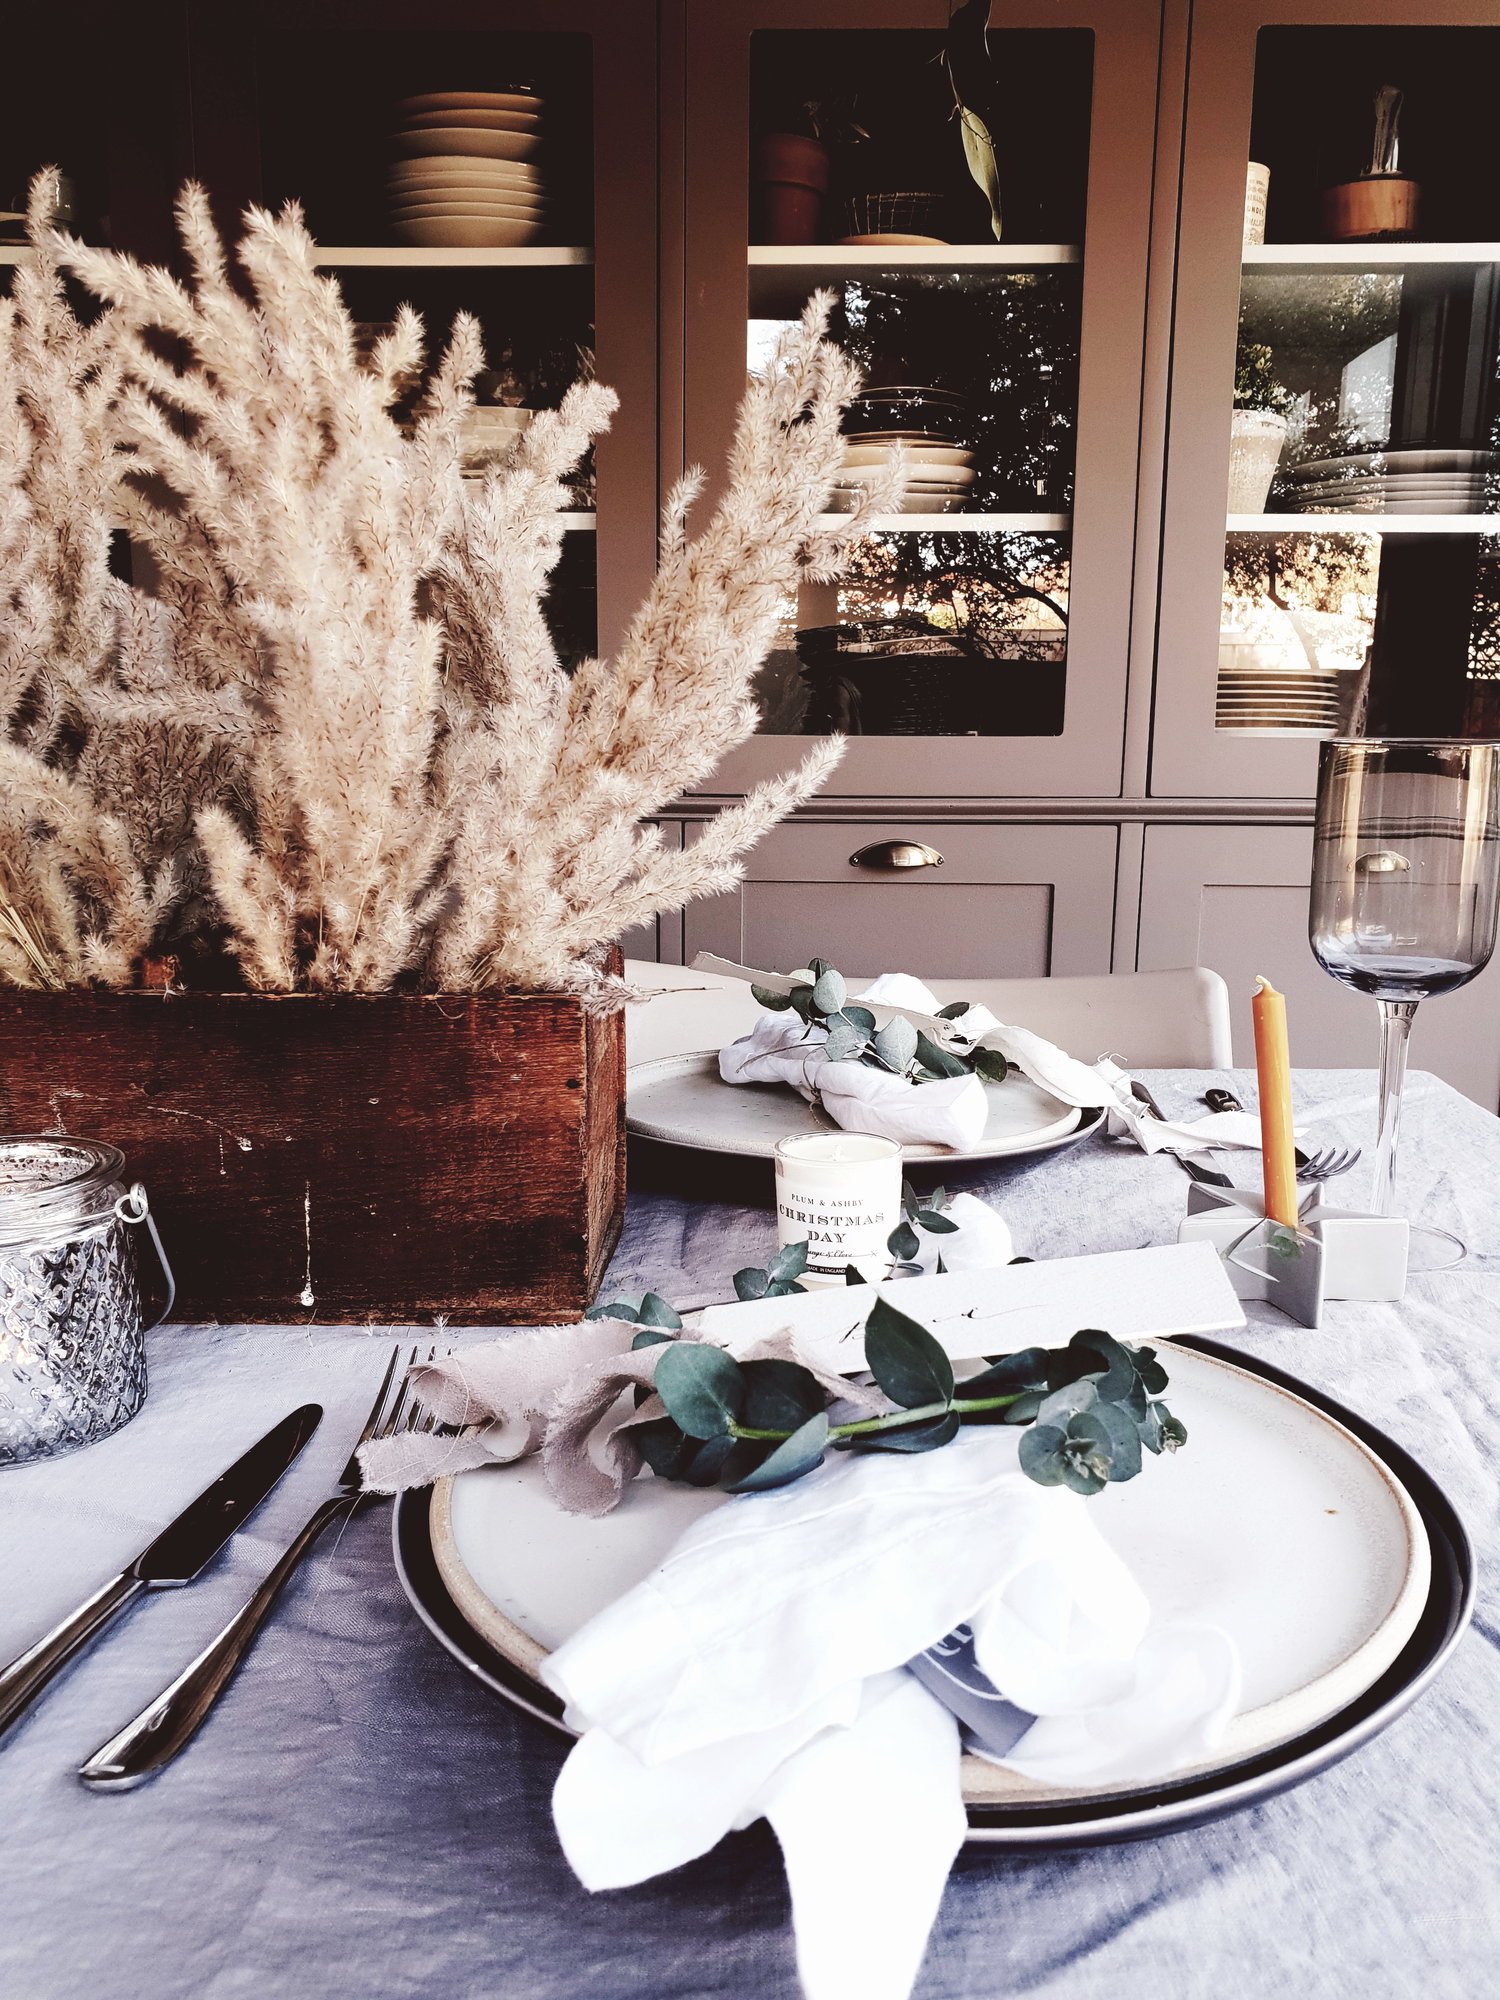  The wooden box adds warmth and texture to the Christmas table 